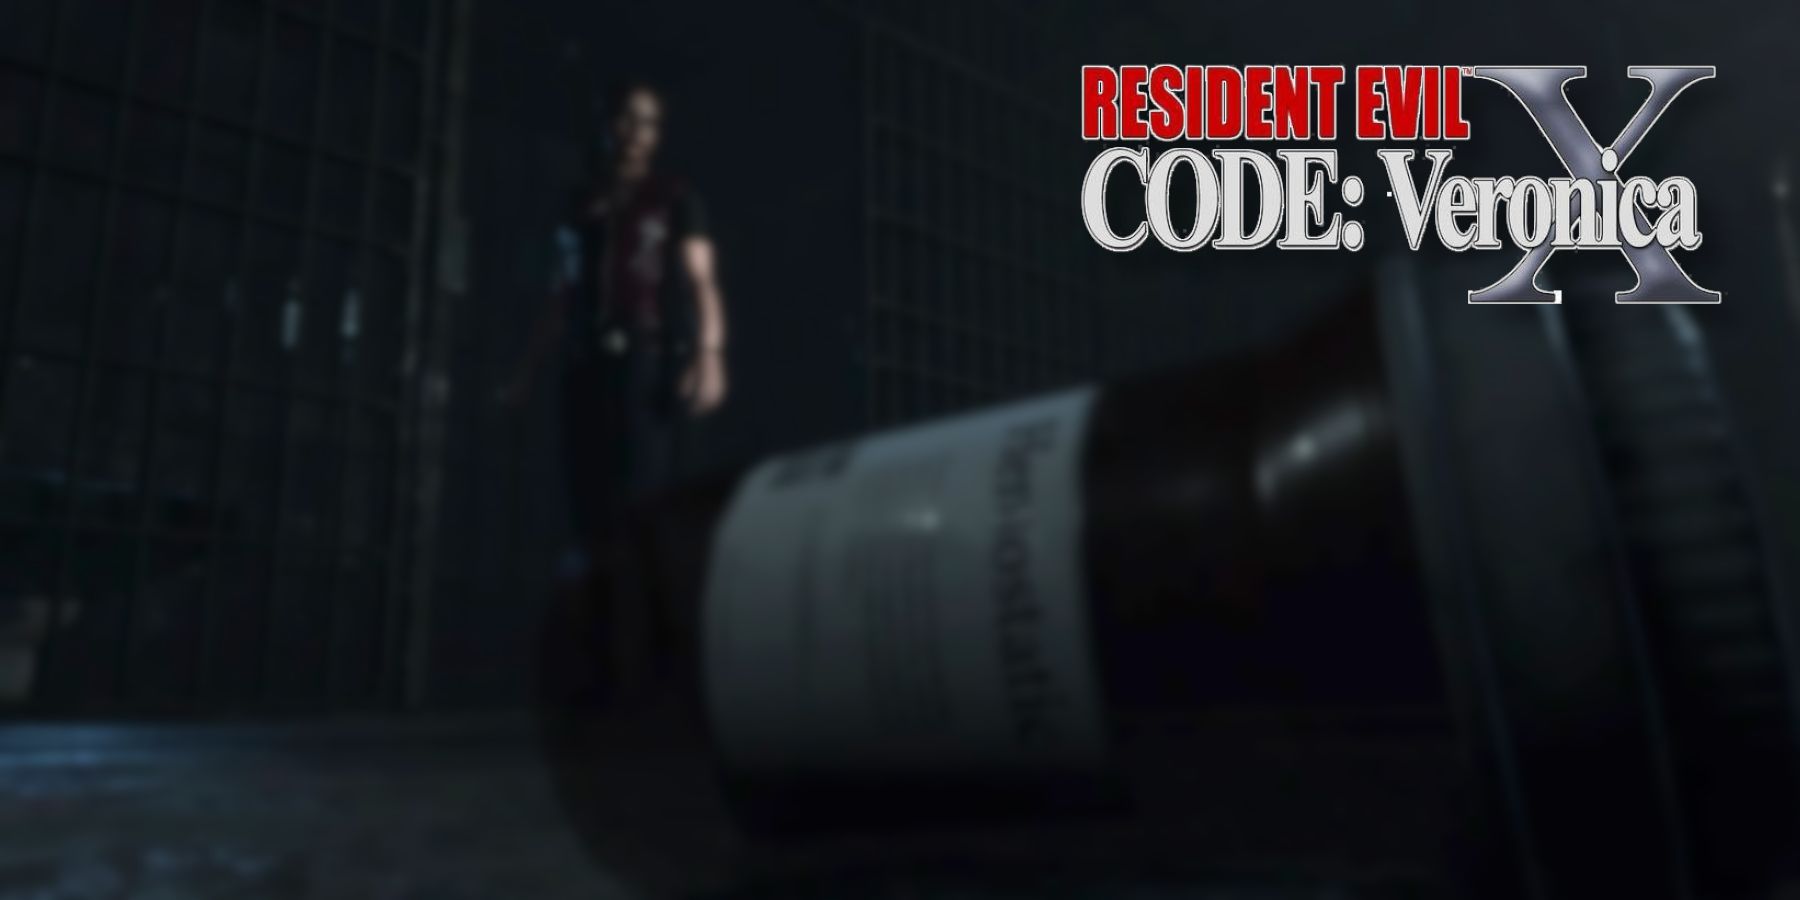 5 minutes of gameplay footage from the upcoming Resident Evil Code